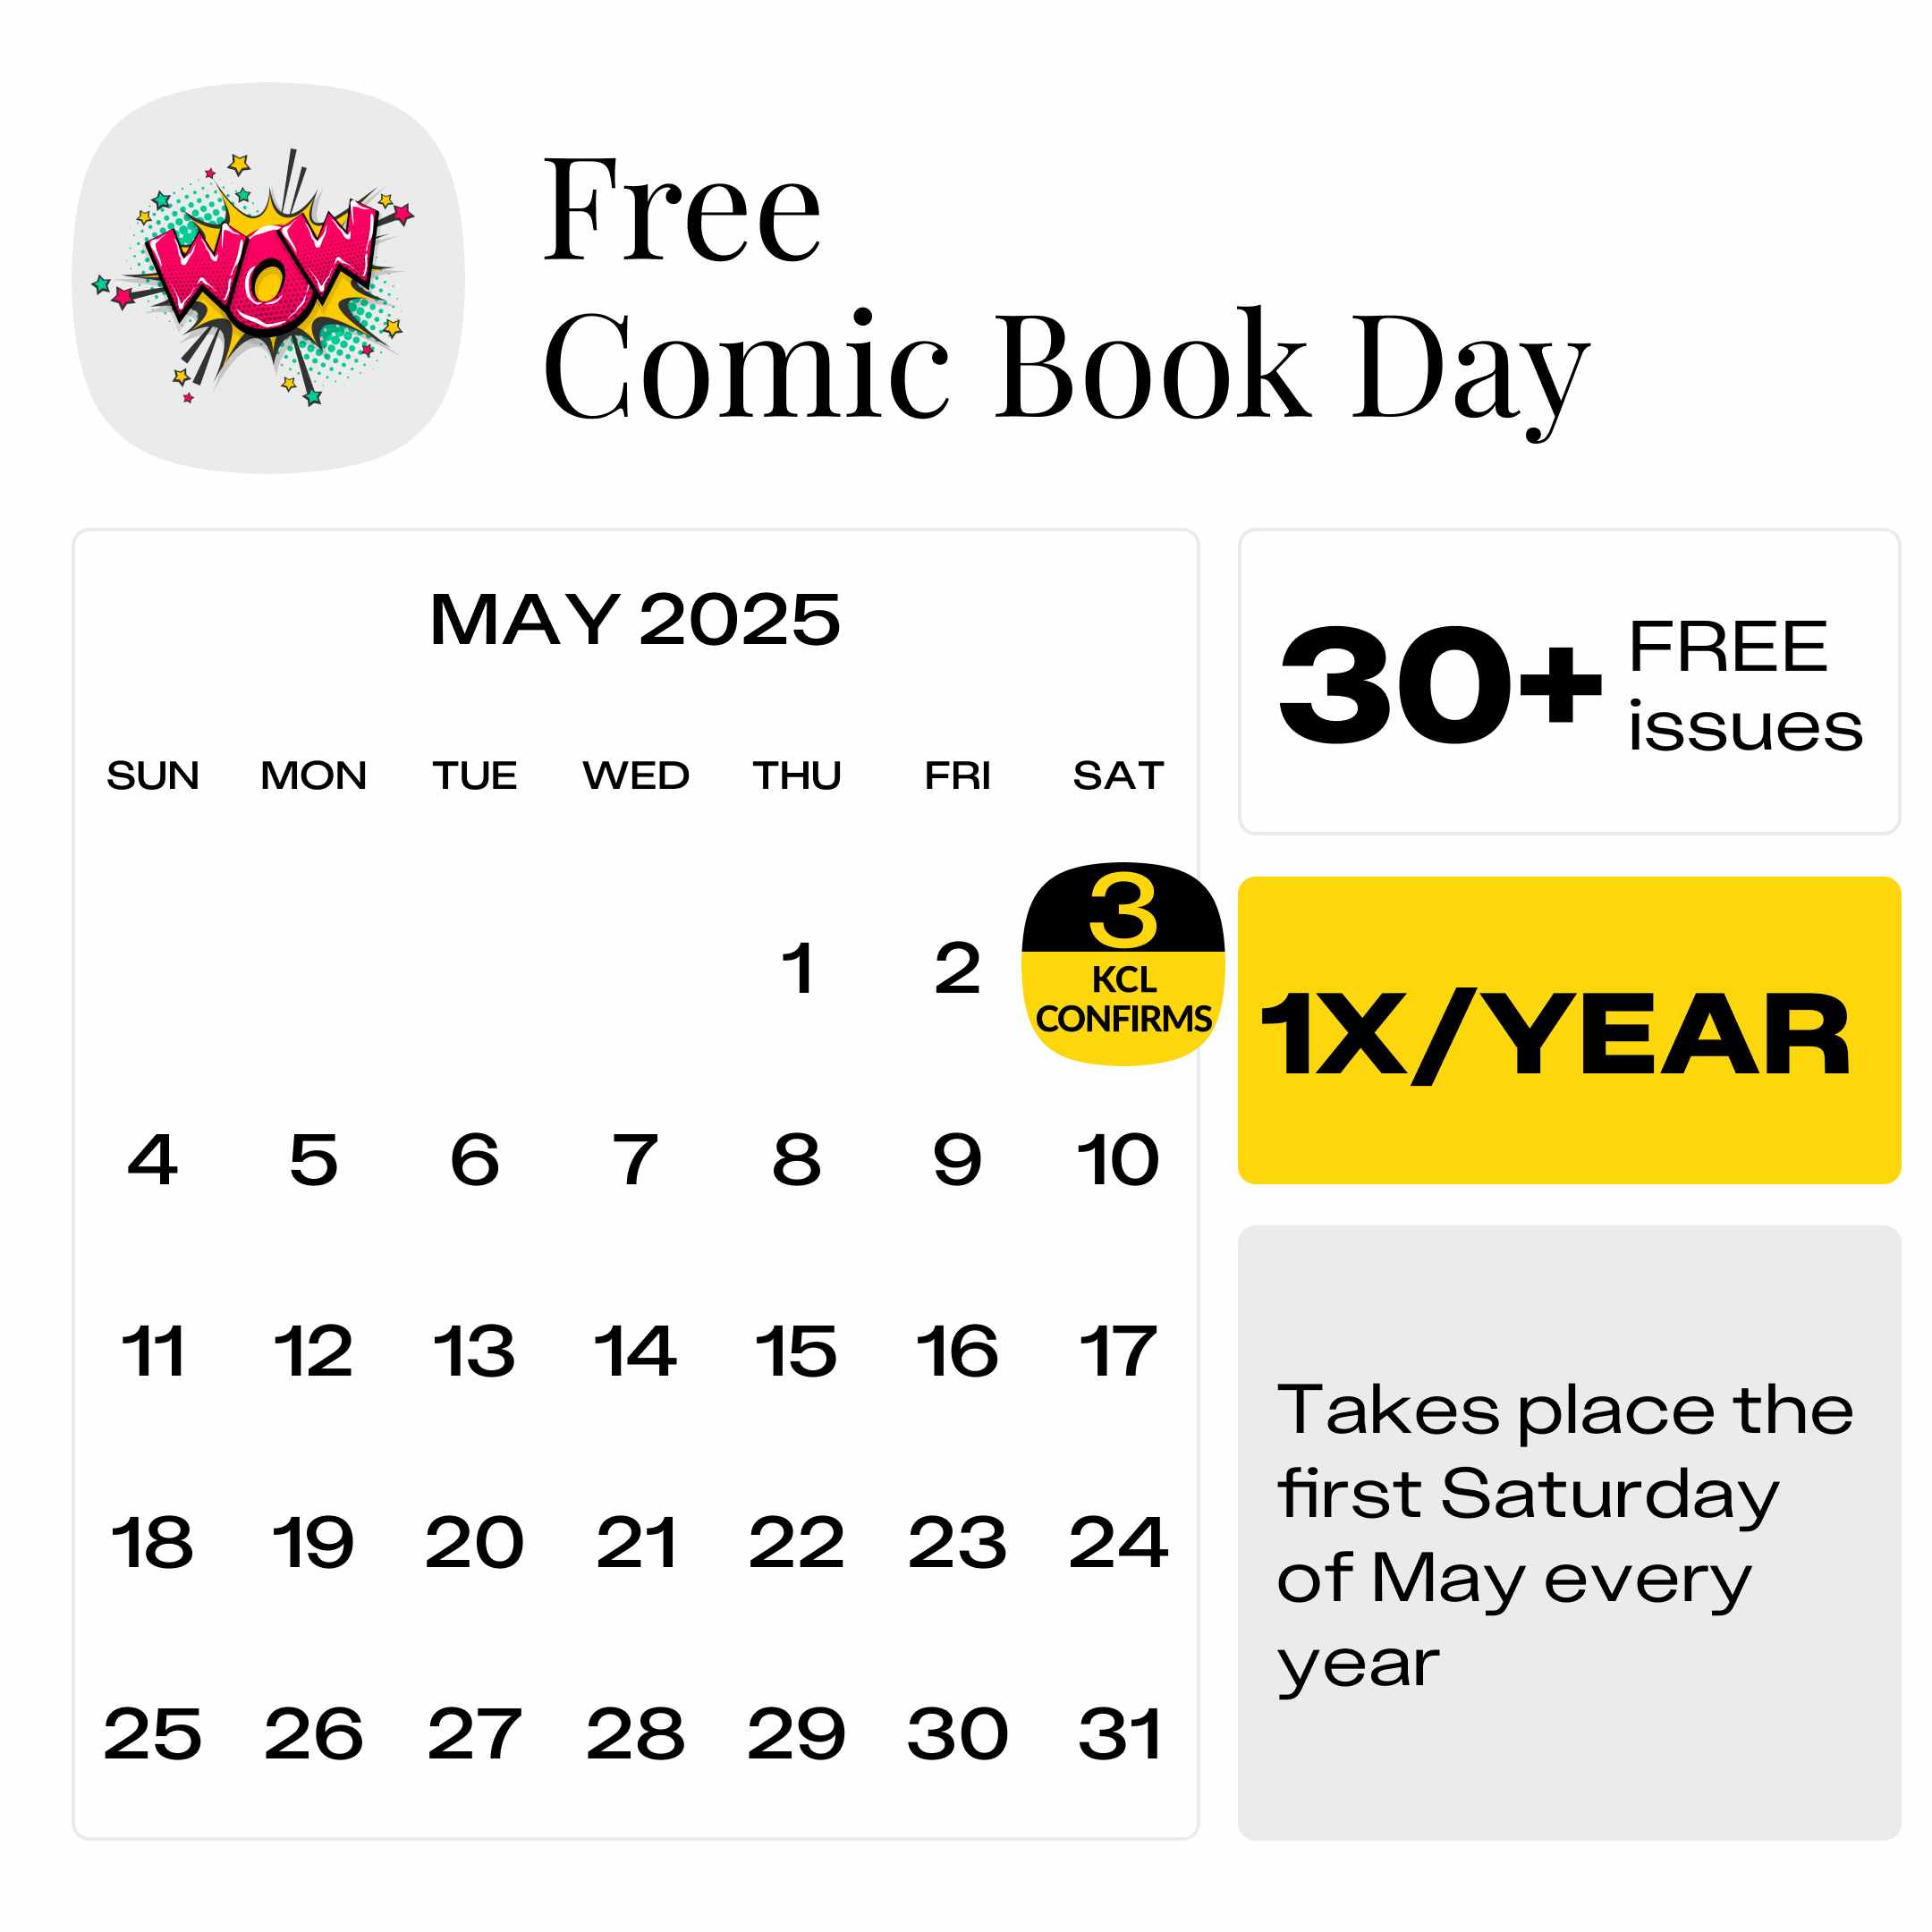 Free-Comic-Book-Day-2025-confirmed